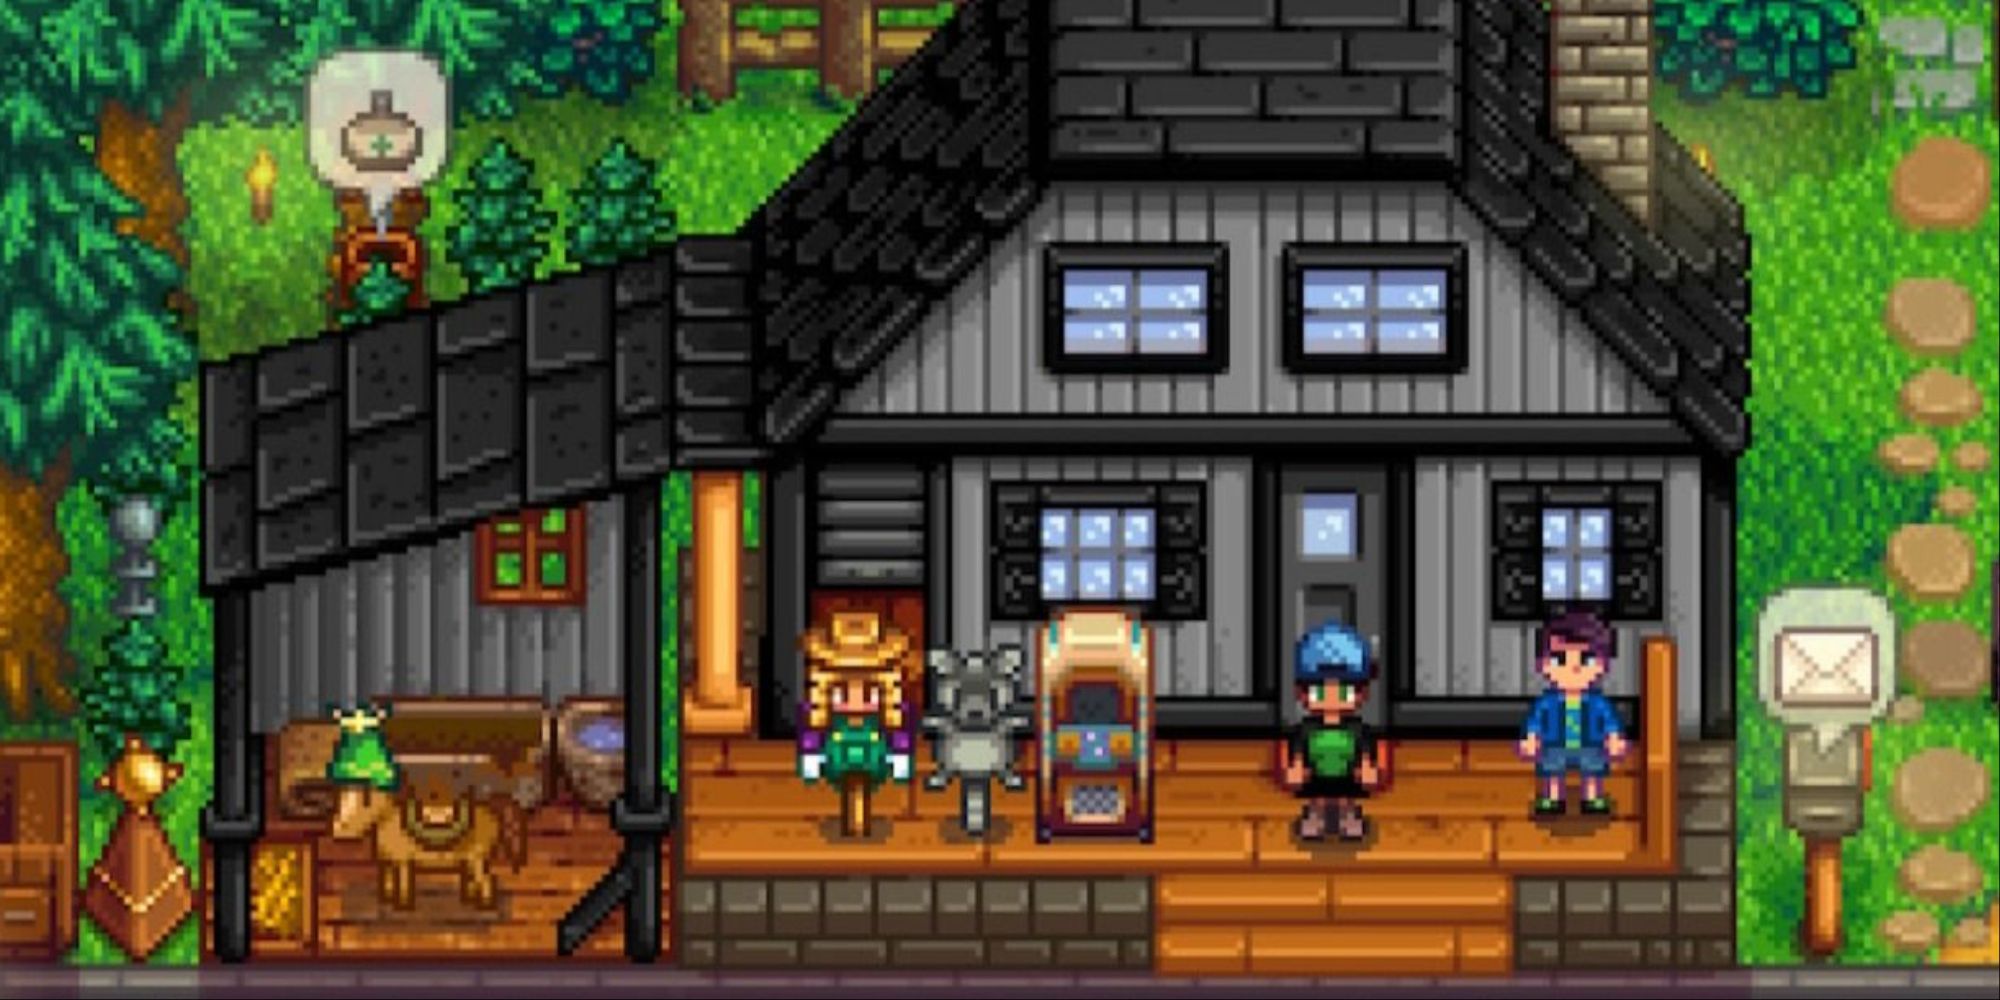 Stardew Valley - the farmhouse with the player and shane standing outside